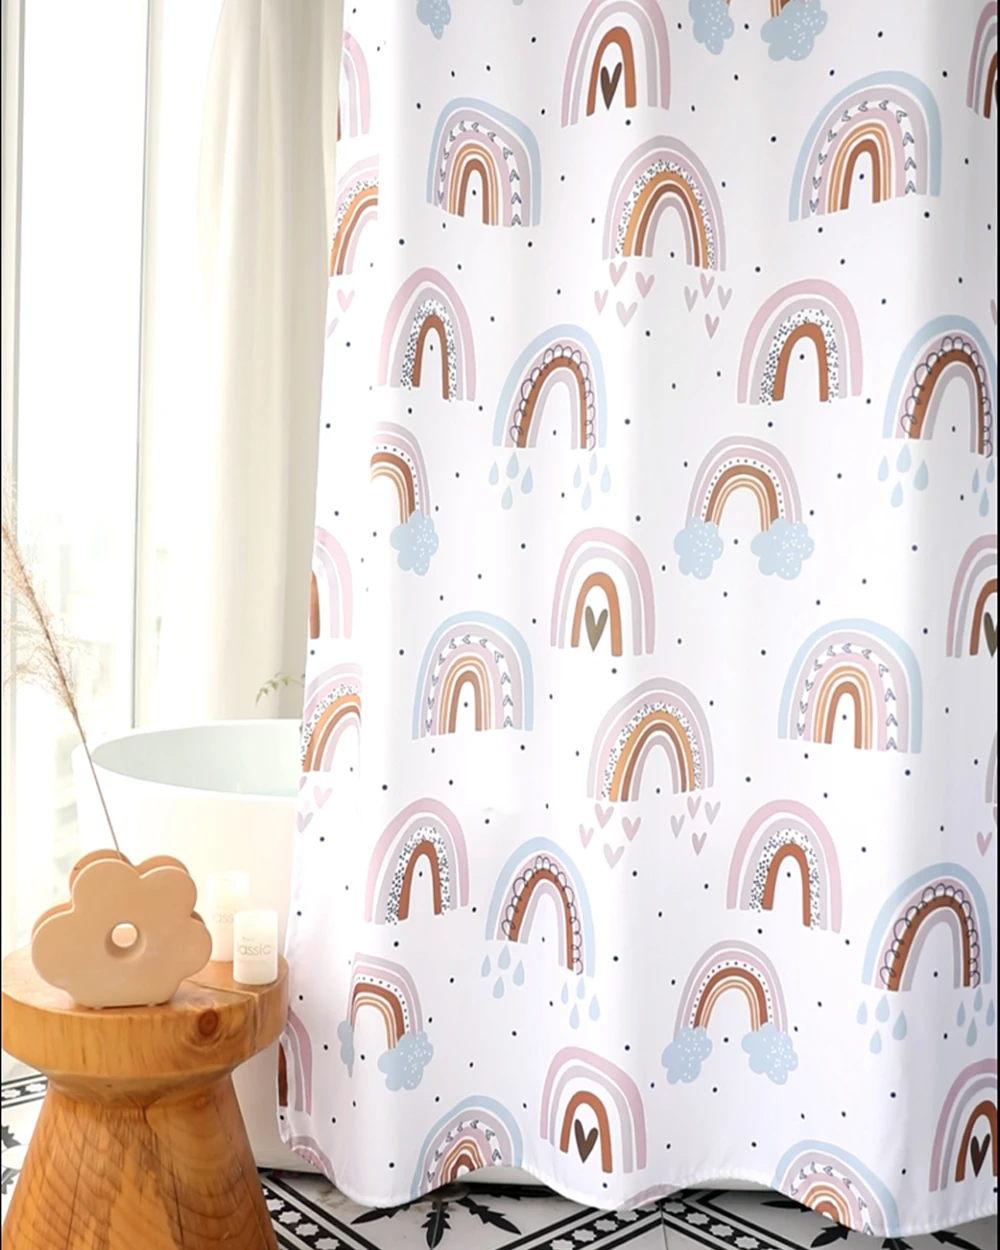 

not in/Rainbow Roman Hole Shower Curtain, 99.9% Waterproof, Bathroom Thicken Mildewproof Fabric, Home Curtains can be customized